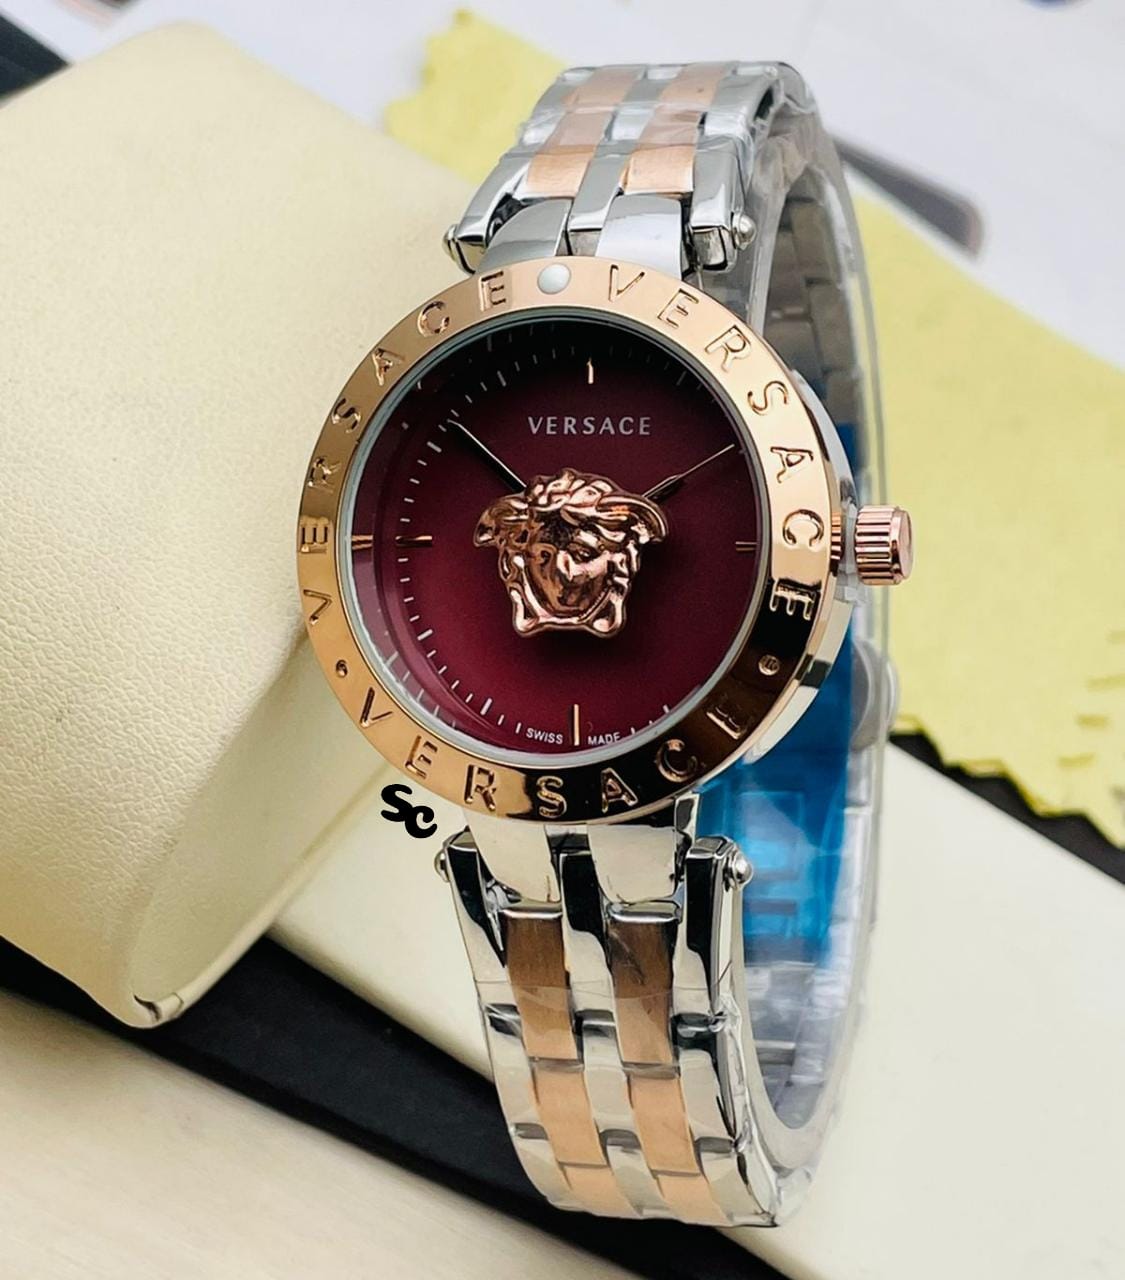 Extraordinary & Limited Edition Heritage collection by Versace, built up only to enhance your outfit. ✅ # Versace # For Her # Sleek and Decent # Dial Size 33mm # Beautiful Branded full Rose Gold CHOOSE YOUR DESIRED COLOUR NOW ❤️ - Working 12 hour analog - Rose Gold Stainless Steel bracelet - Designed bezel - Stainless Steel Back - Easy folding clasp lock - Water Resistant - quartz movement machinery ❣️ ✨ New model with price updated ✨